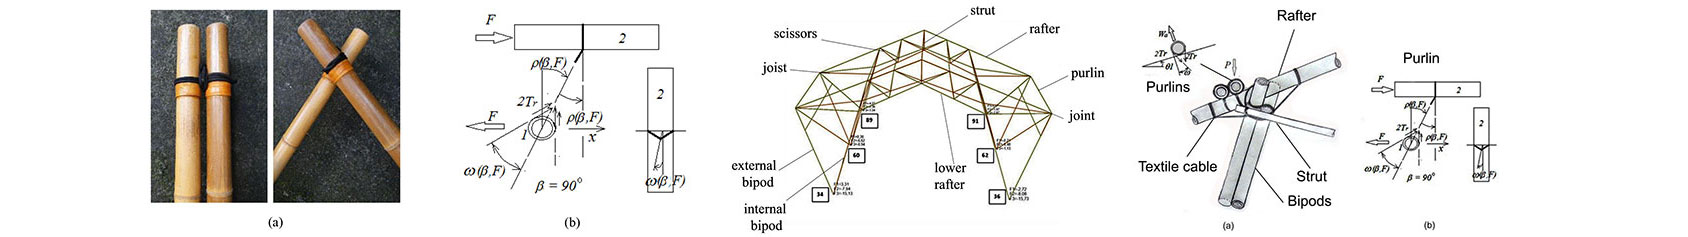 Analysis-of-a-bamboo-structure-with-flexible-joints-International-Journal-of-Space-Structures.jpg